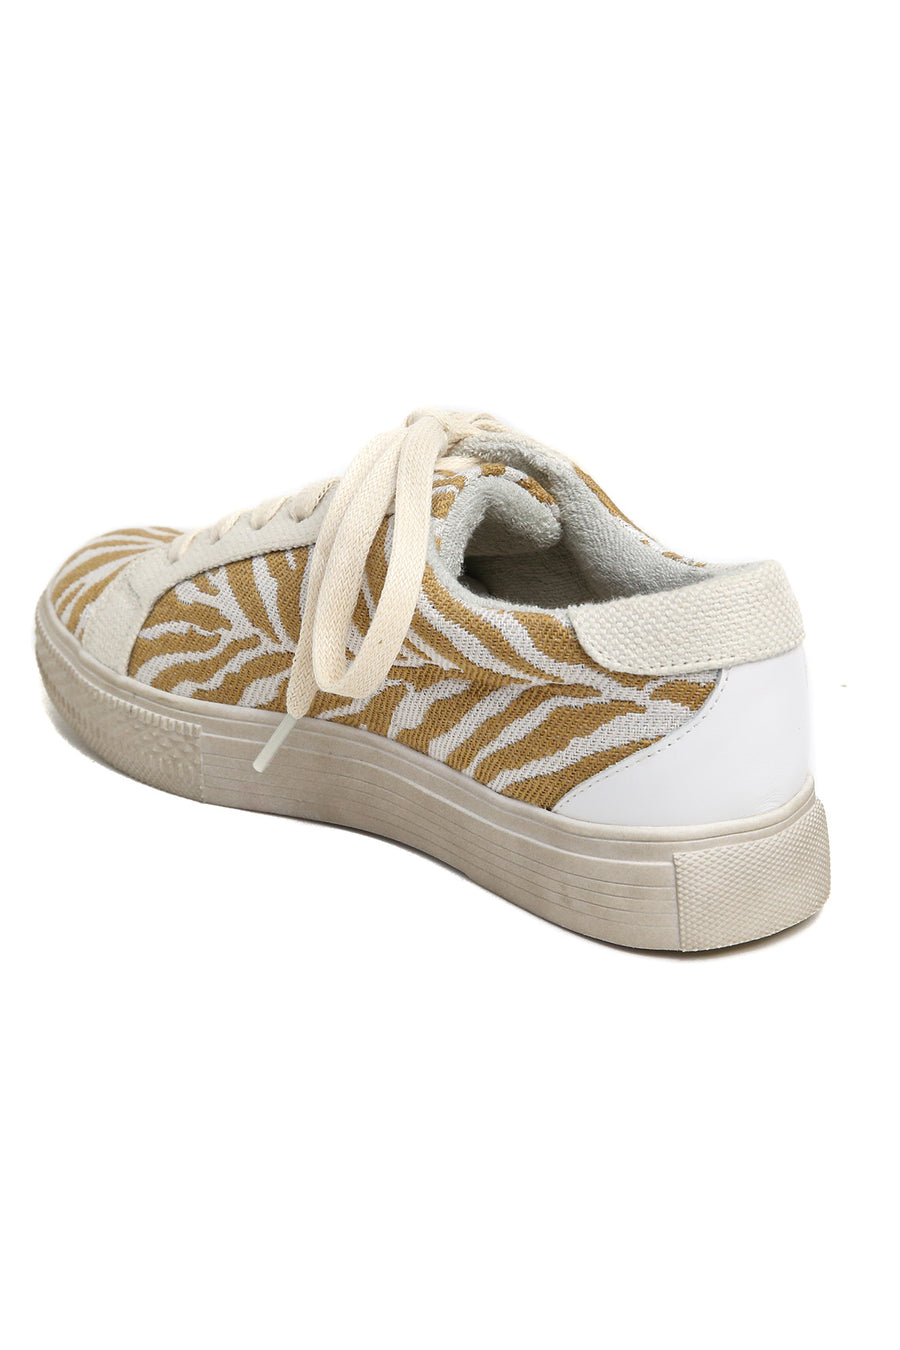 Star Natural Zebra Canvas Sneakers Master